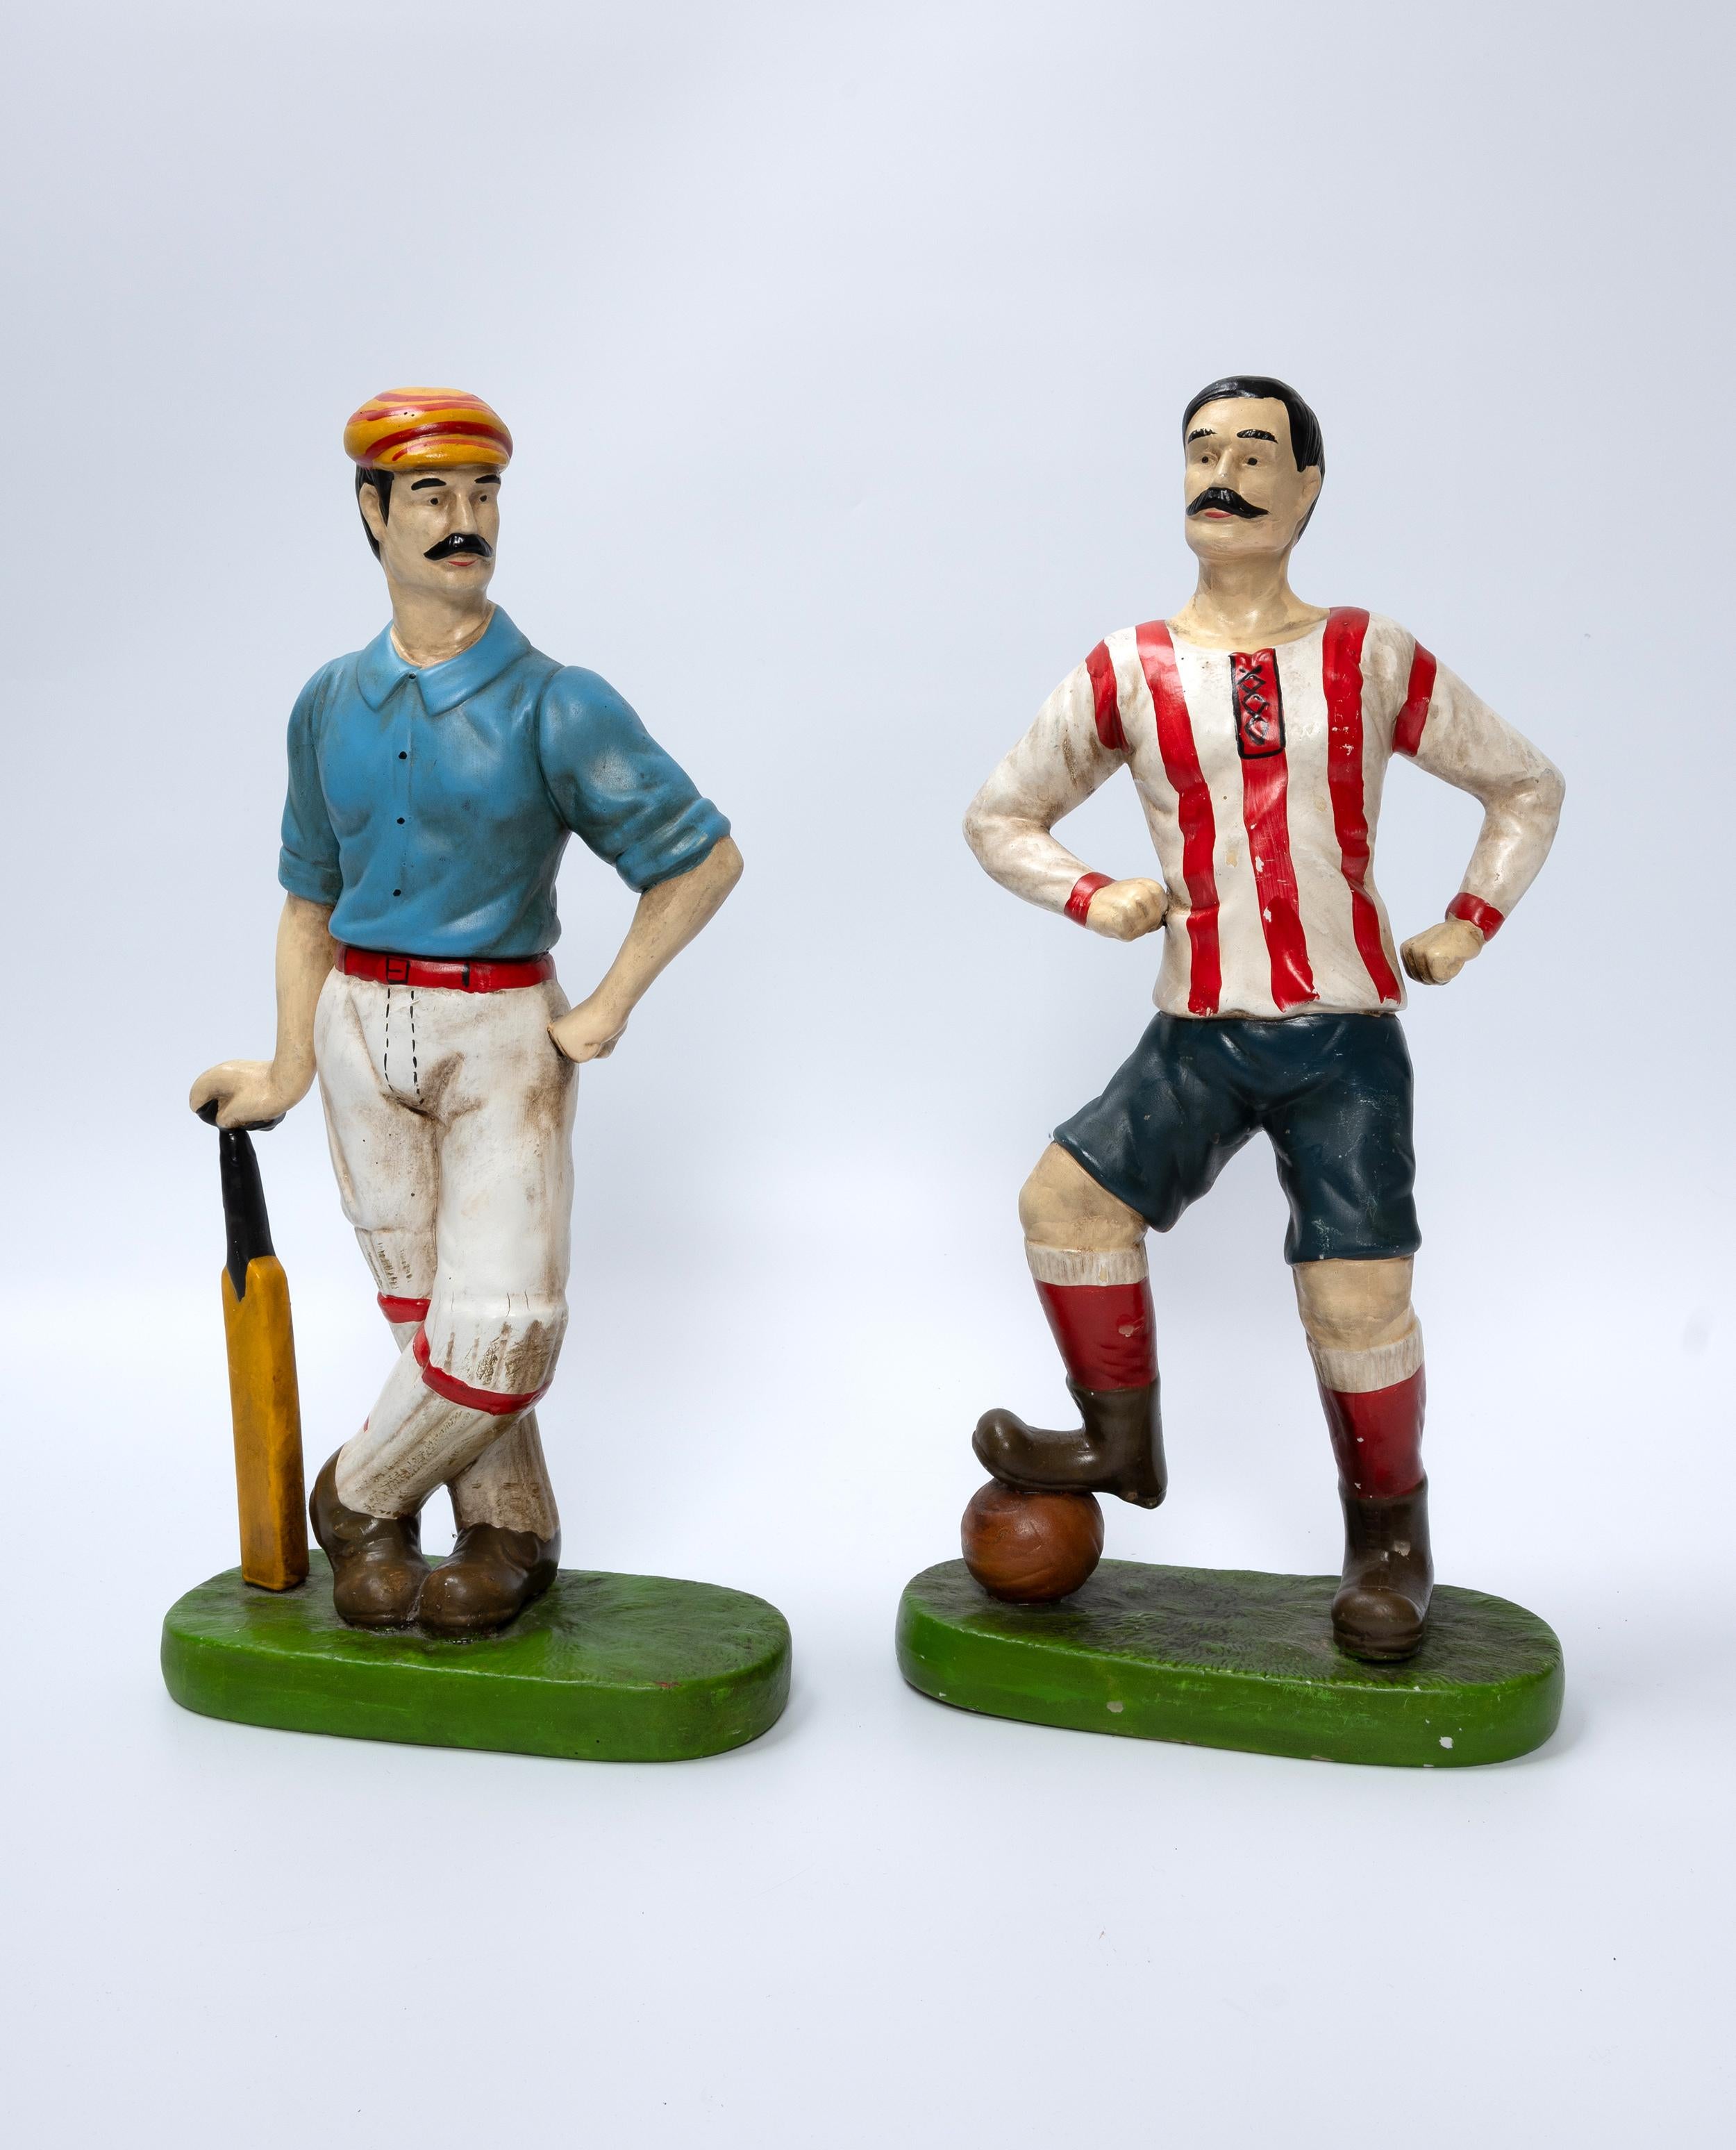 English Sporting Figures Of A Cricketer And A Footballer C.1920

Dimensions:
Foottballer:
h41cm
w21cm
d9.5cm

Cricketer:
h40cm
w20cm
d9cm

In very good condition commensurate of age (please refer to photos).